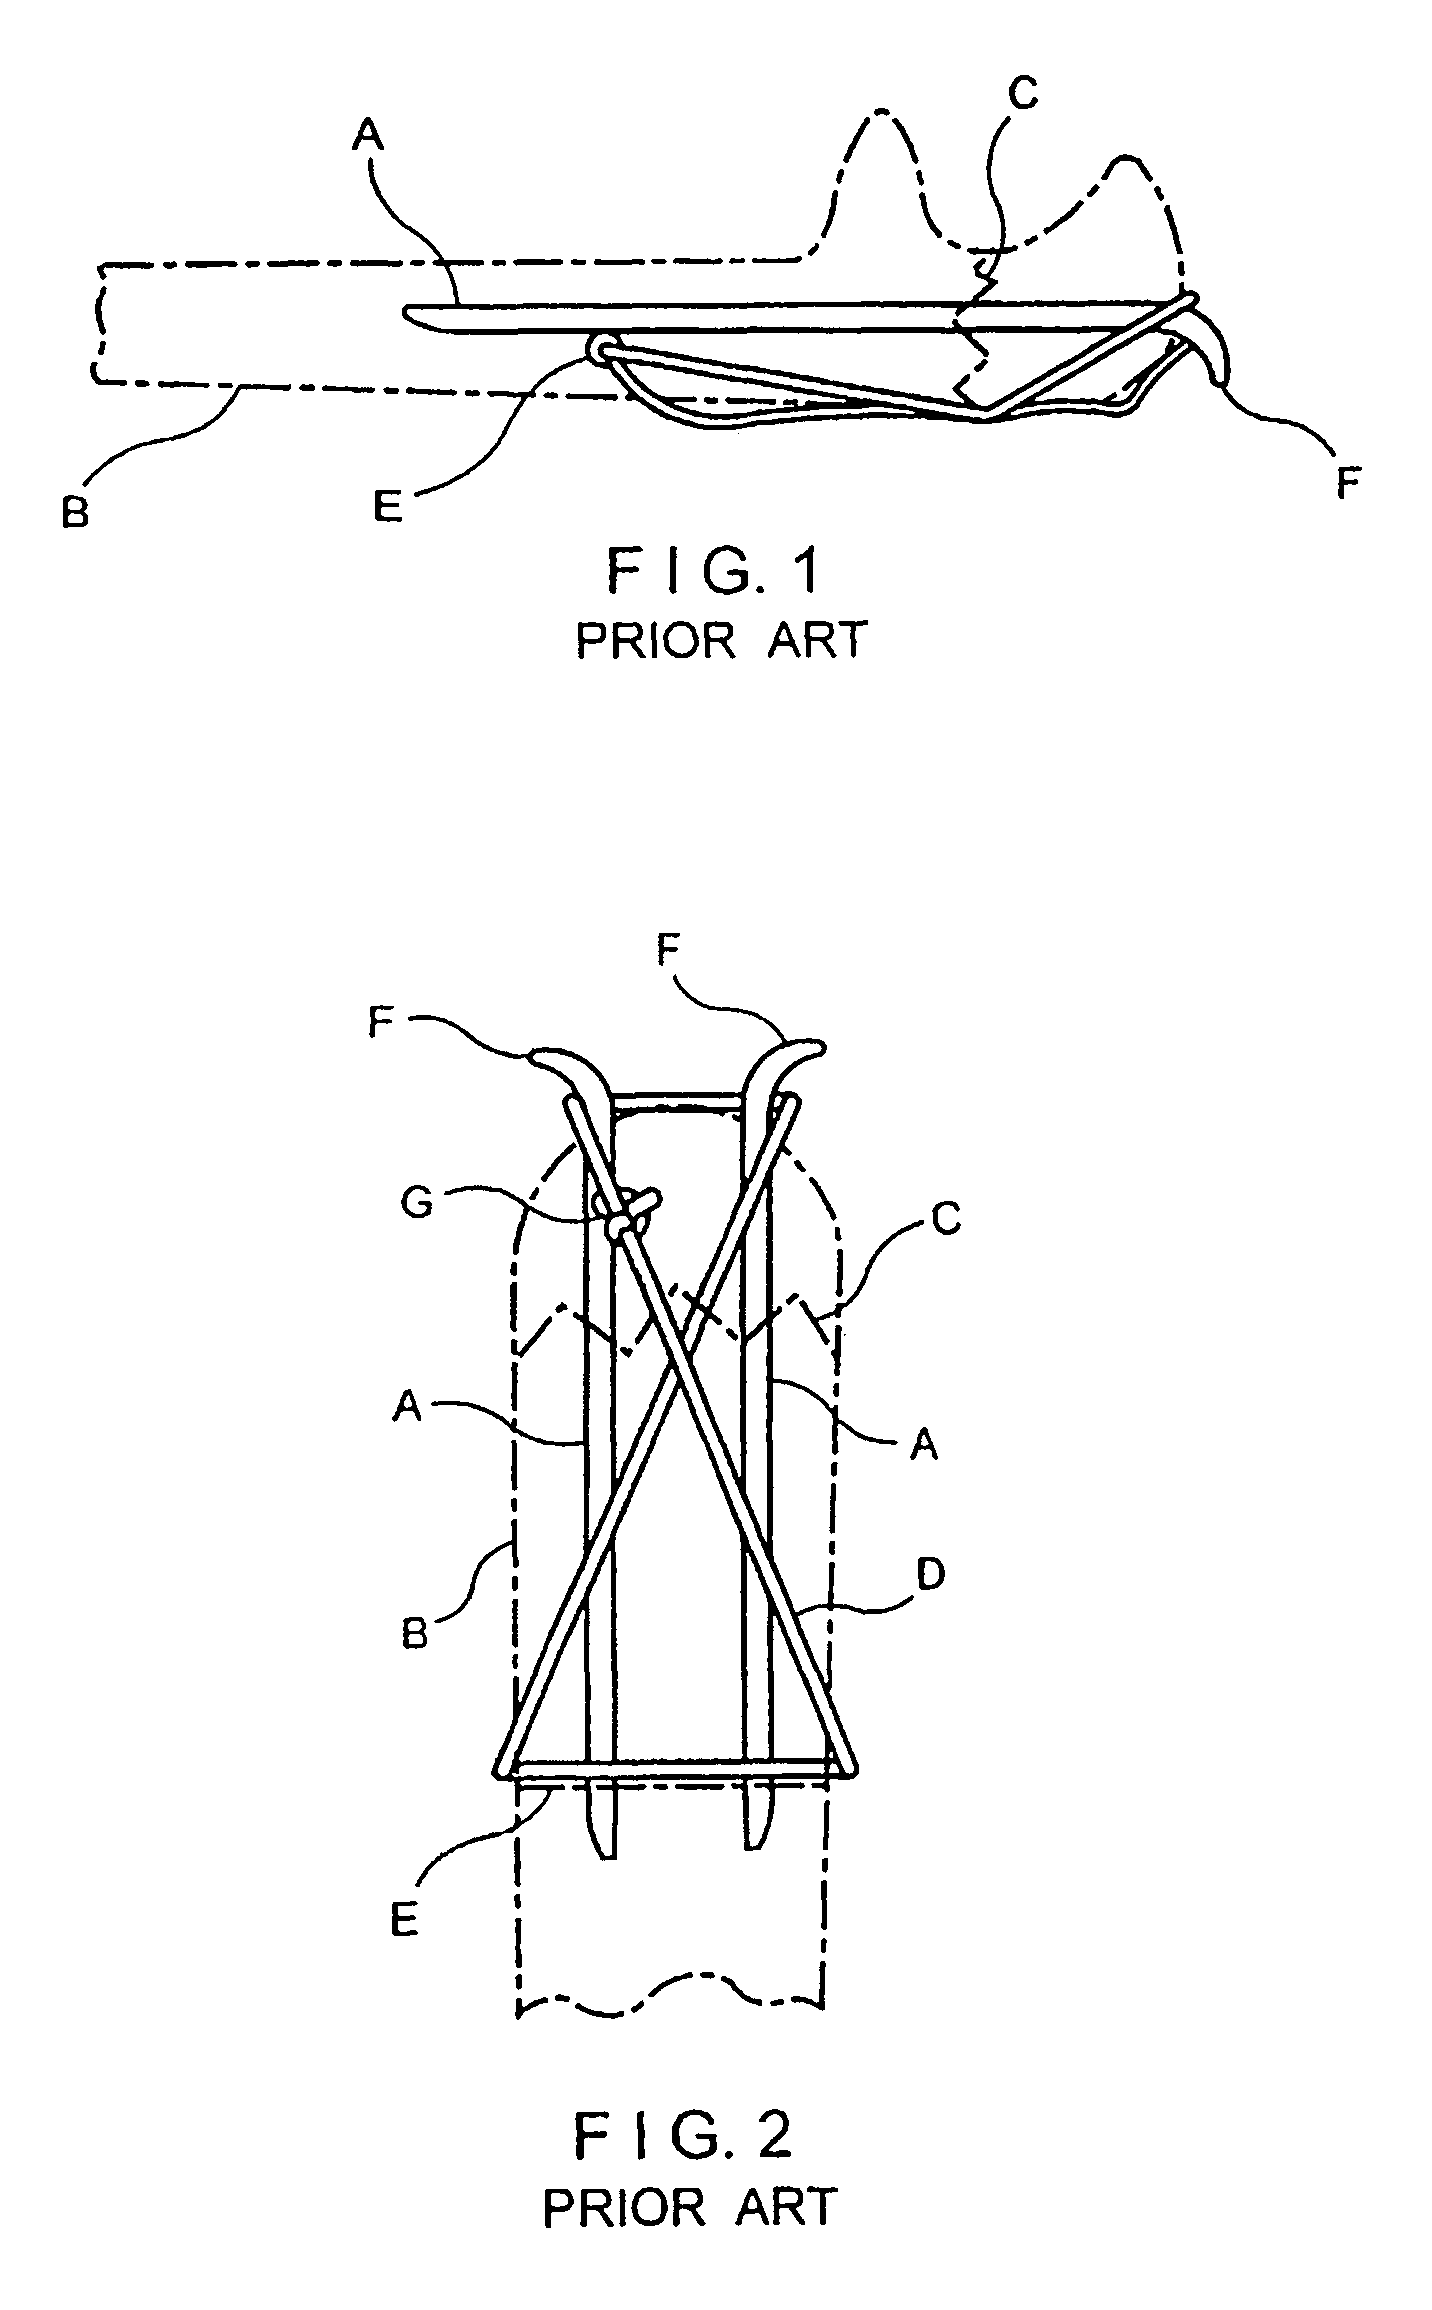 Implant device for applying compression across a fracture site